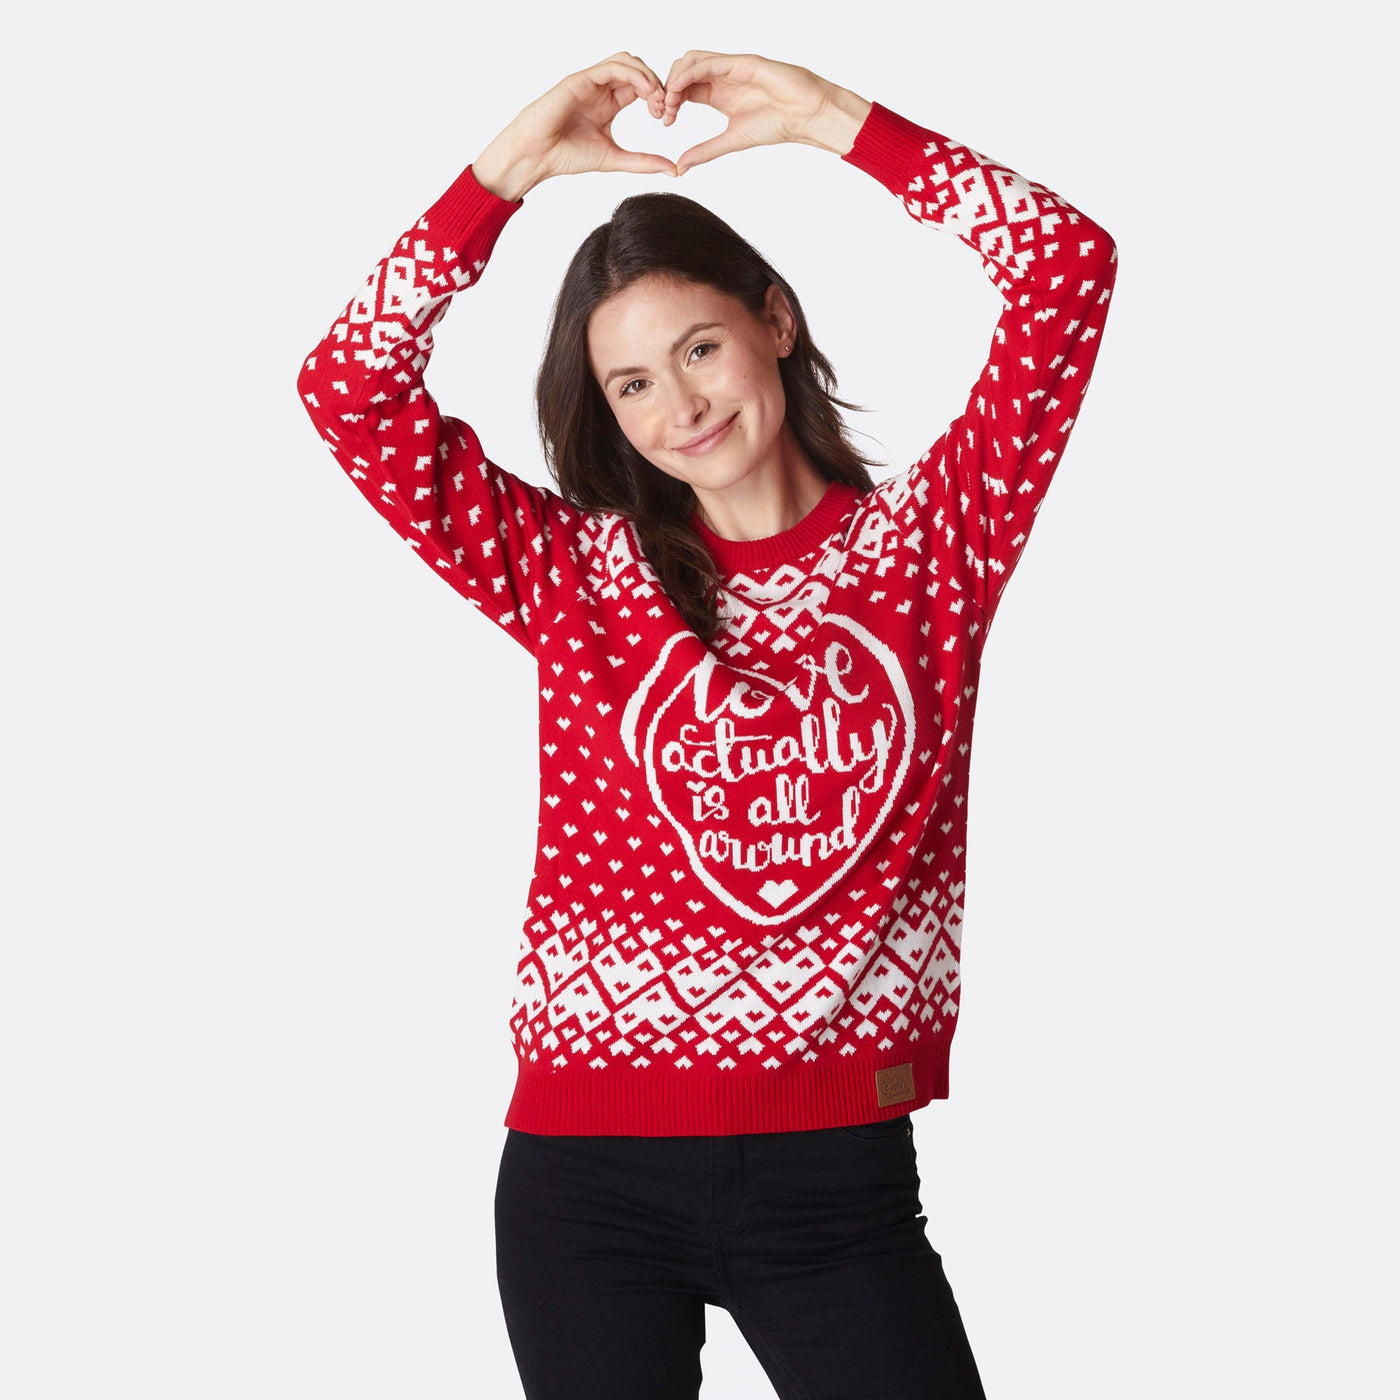 Women's Love Actually Is All Around Christmas Sweater